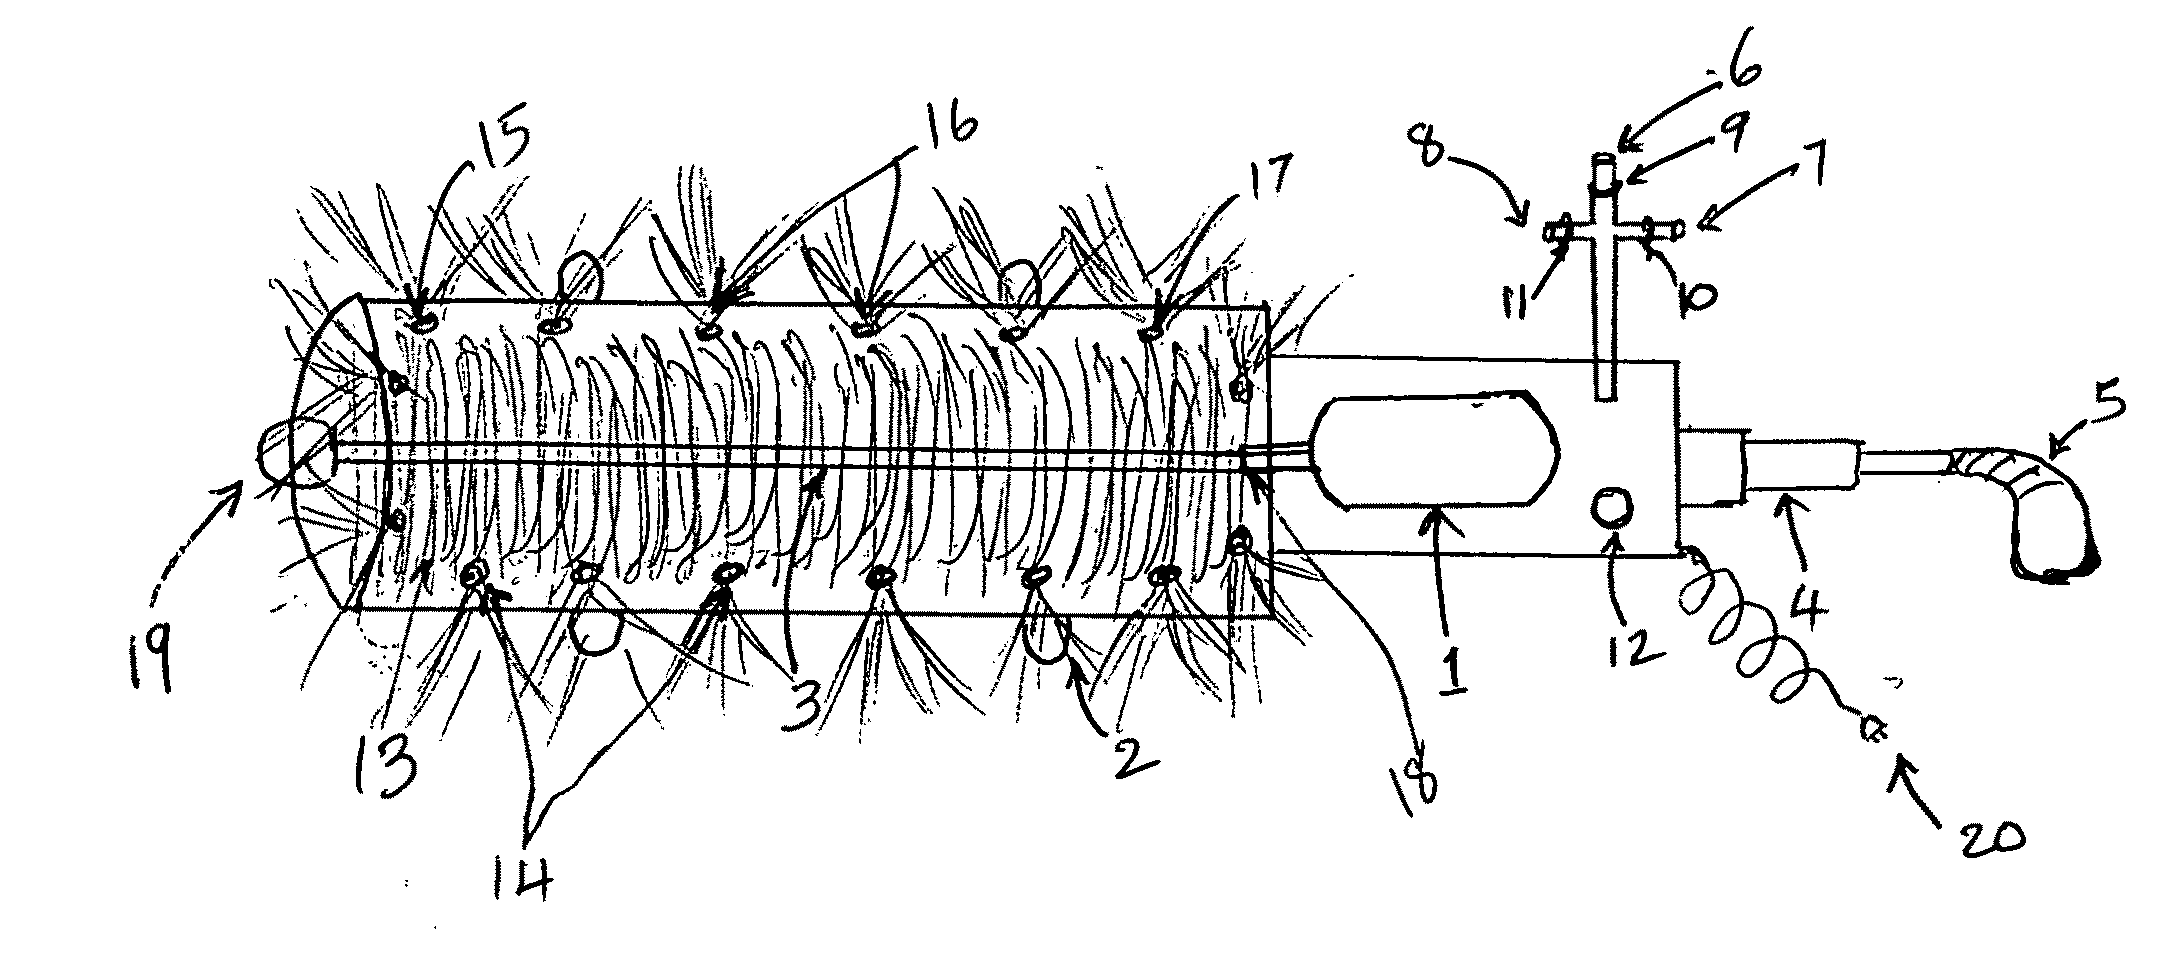 Hand-held multi-function brush system with sprays